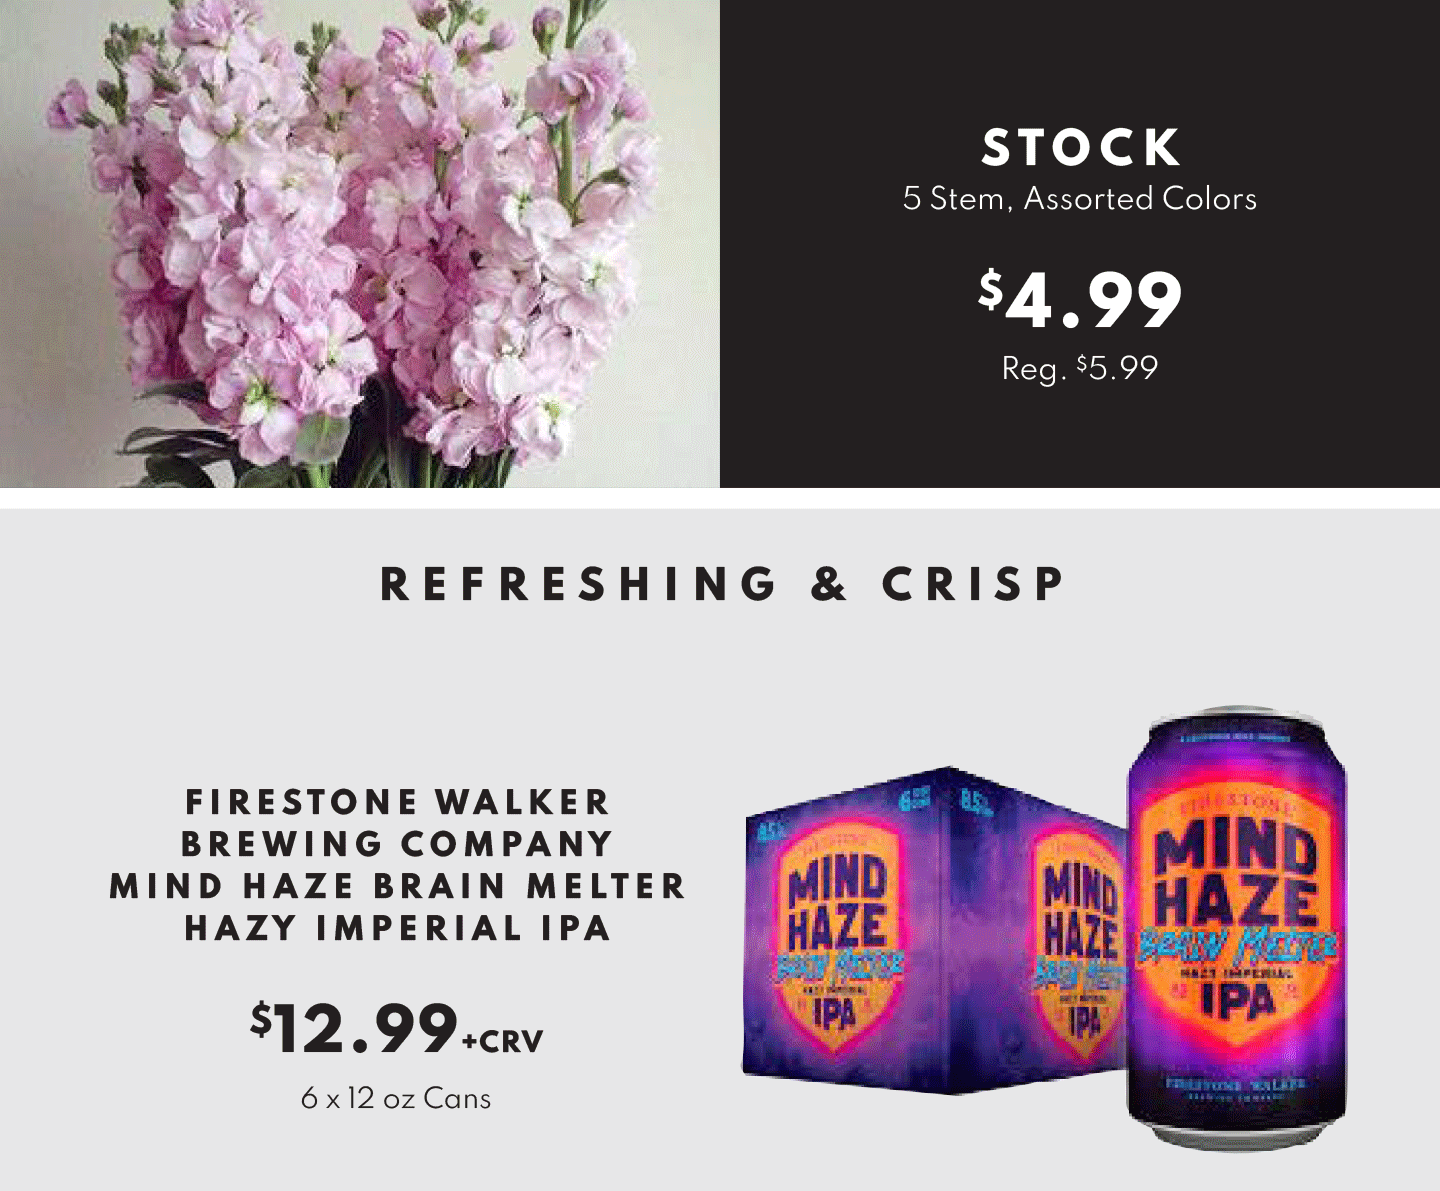 5 stem, Assorted Colors $4.99 and Firestone Walker Brewing Company Mind Haze Brain Melter HAzy Imperial IPA $12.99